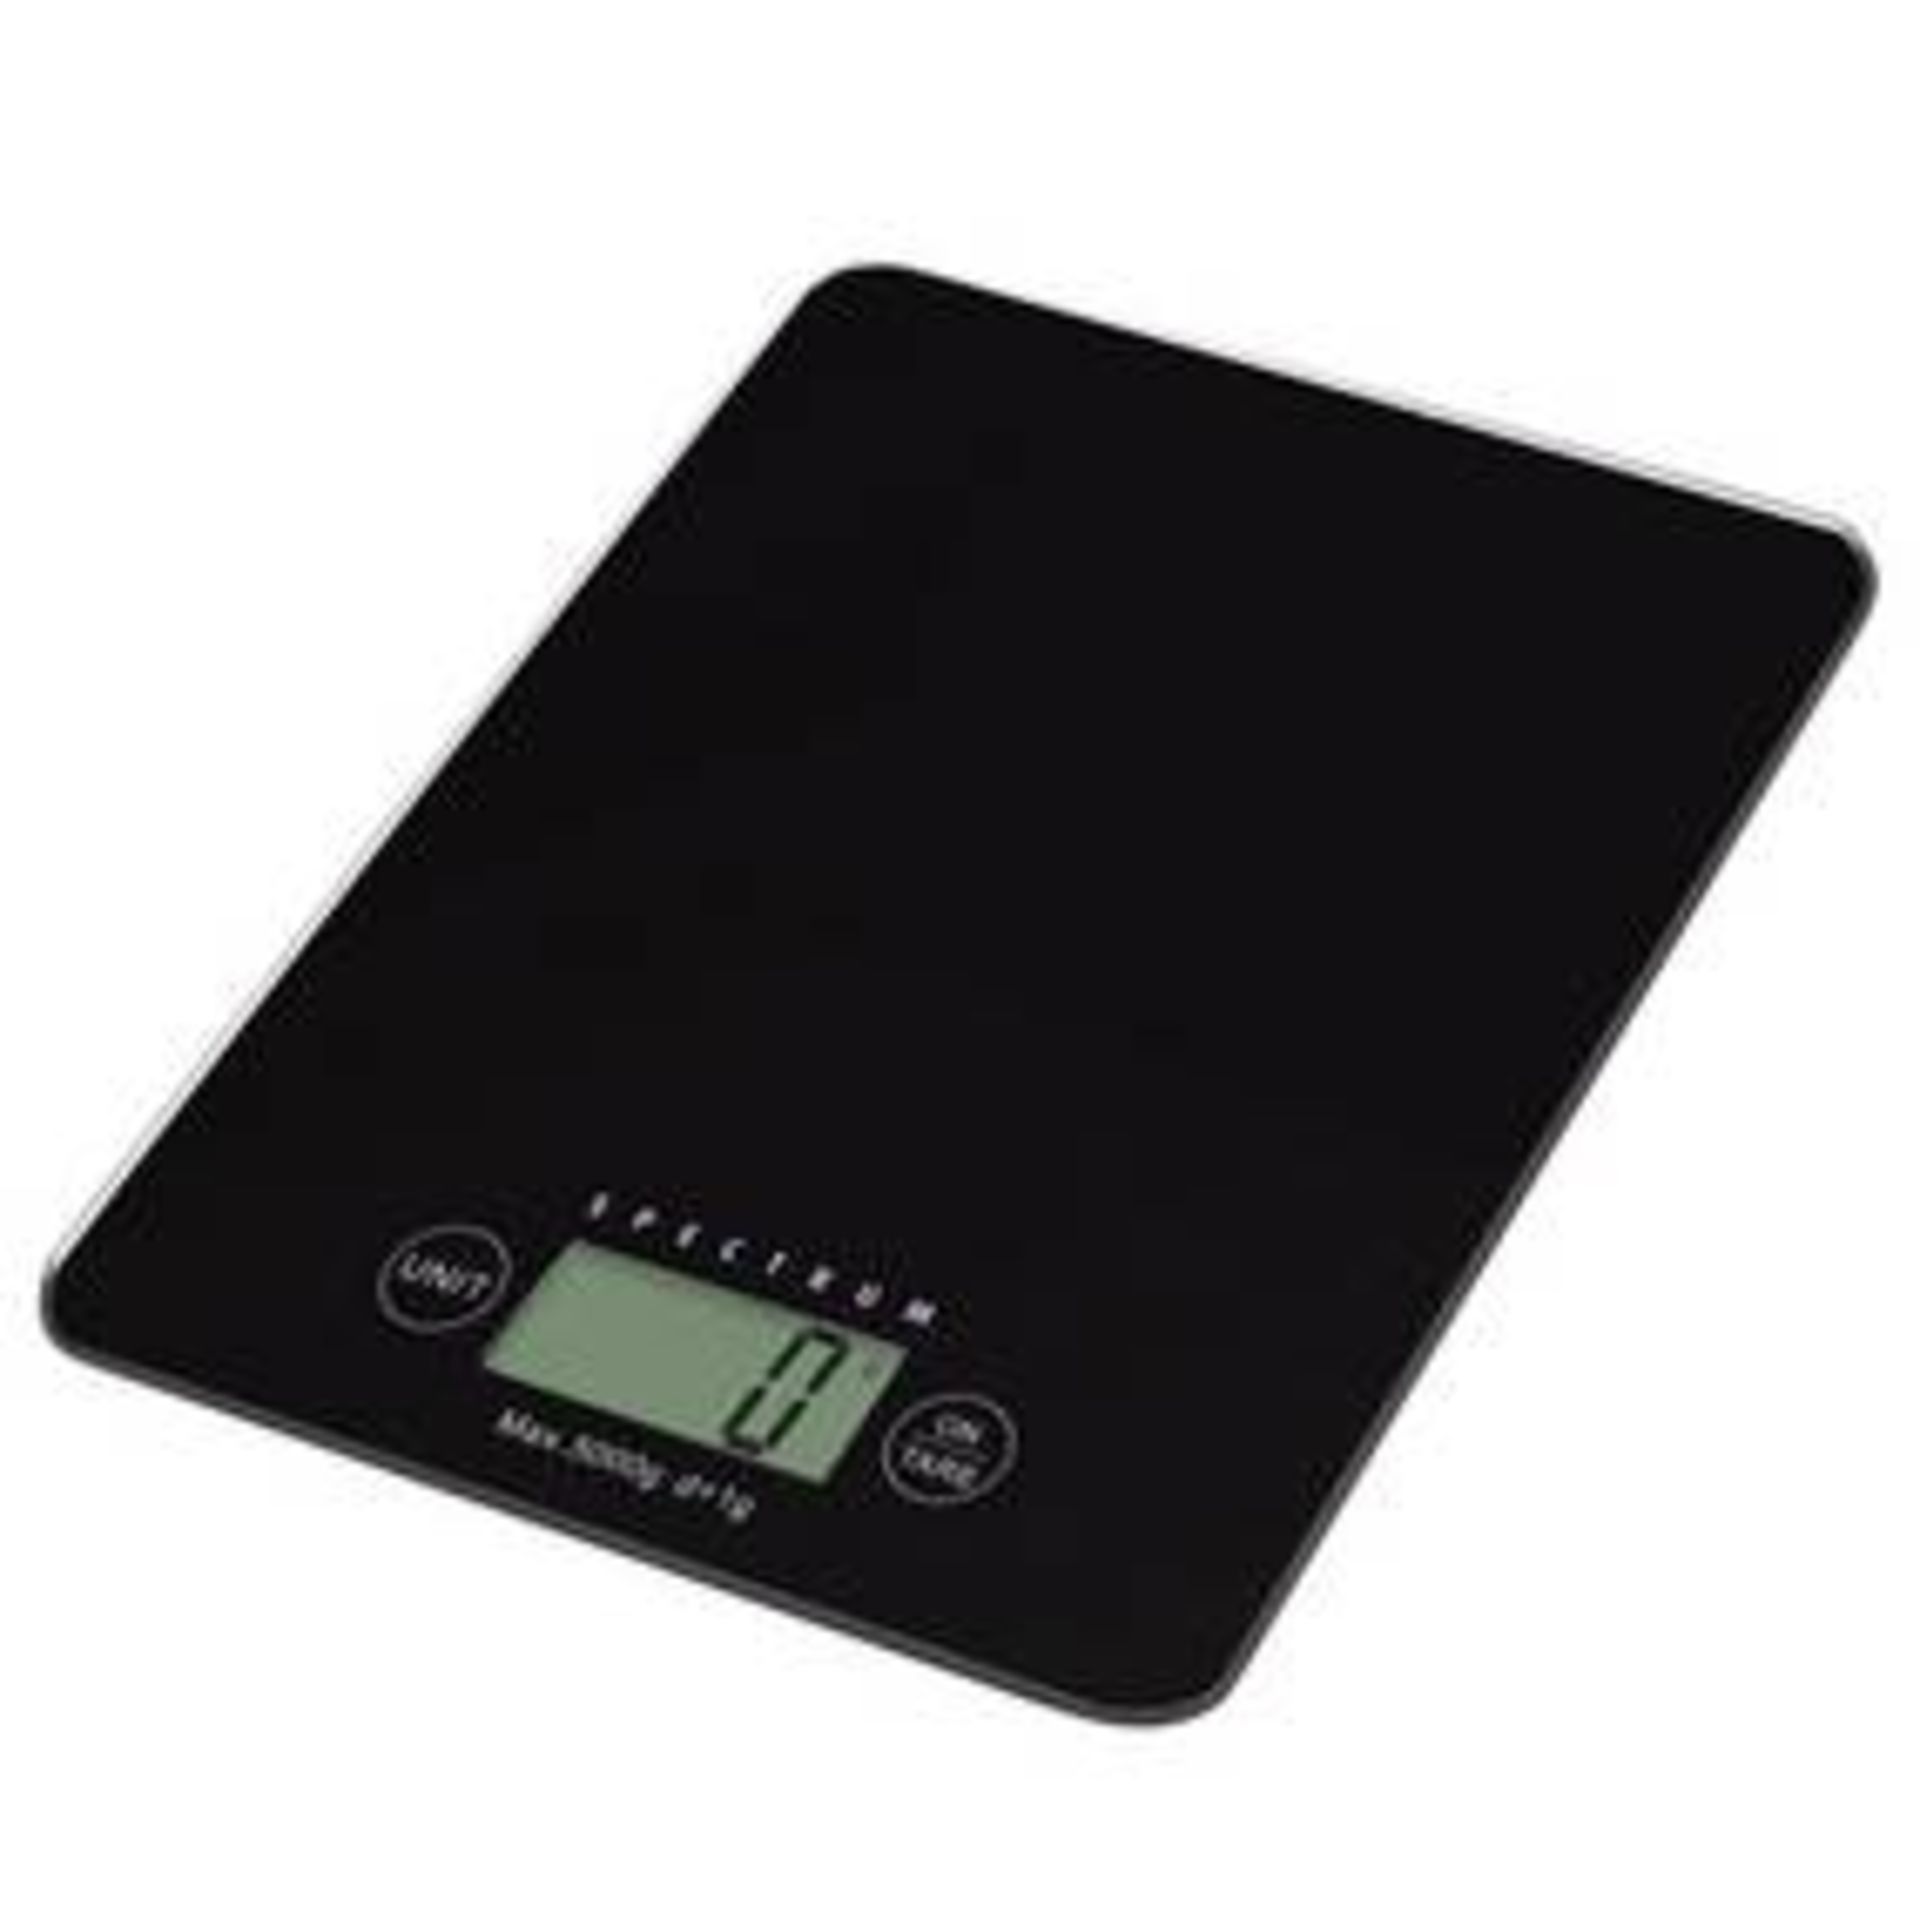 V Brand New Digital Kitchen Scales With Large LCD Display In Ibs Ozs & Grams (Styles May Vary & - Image 2 of 4